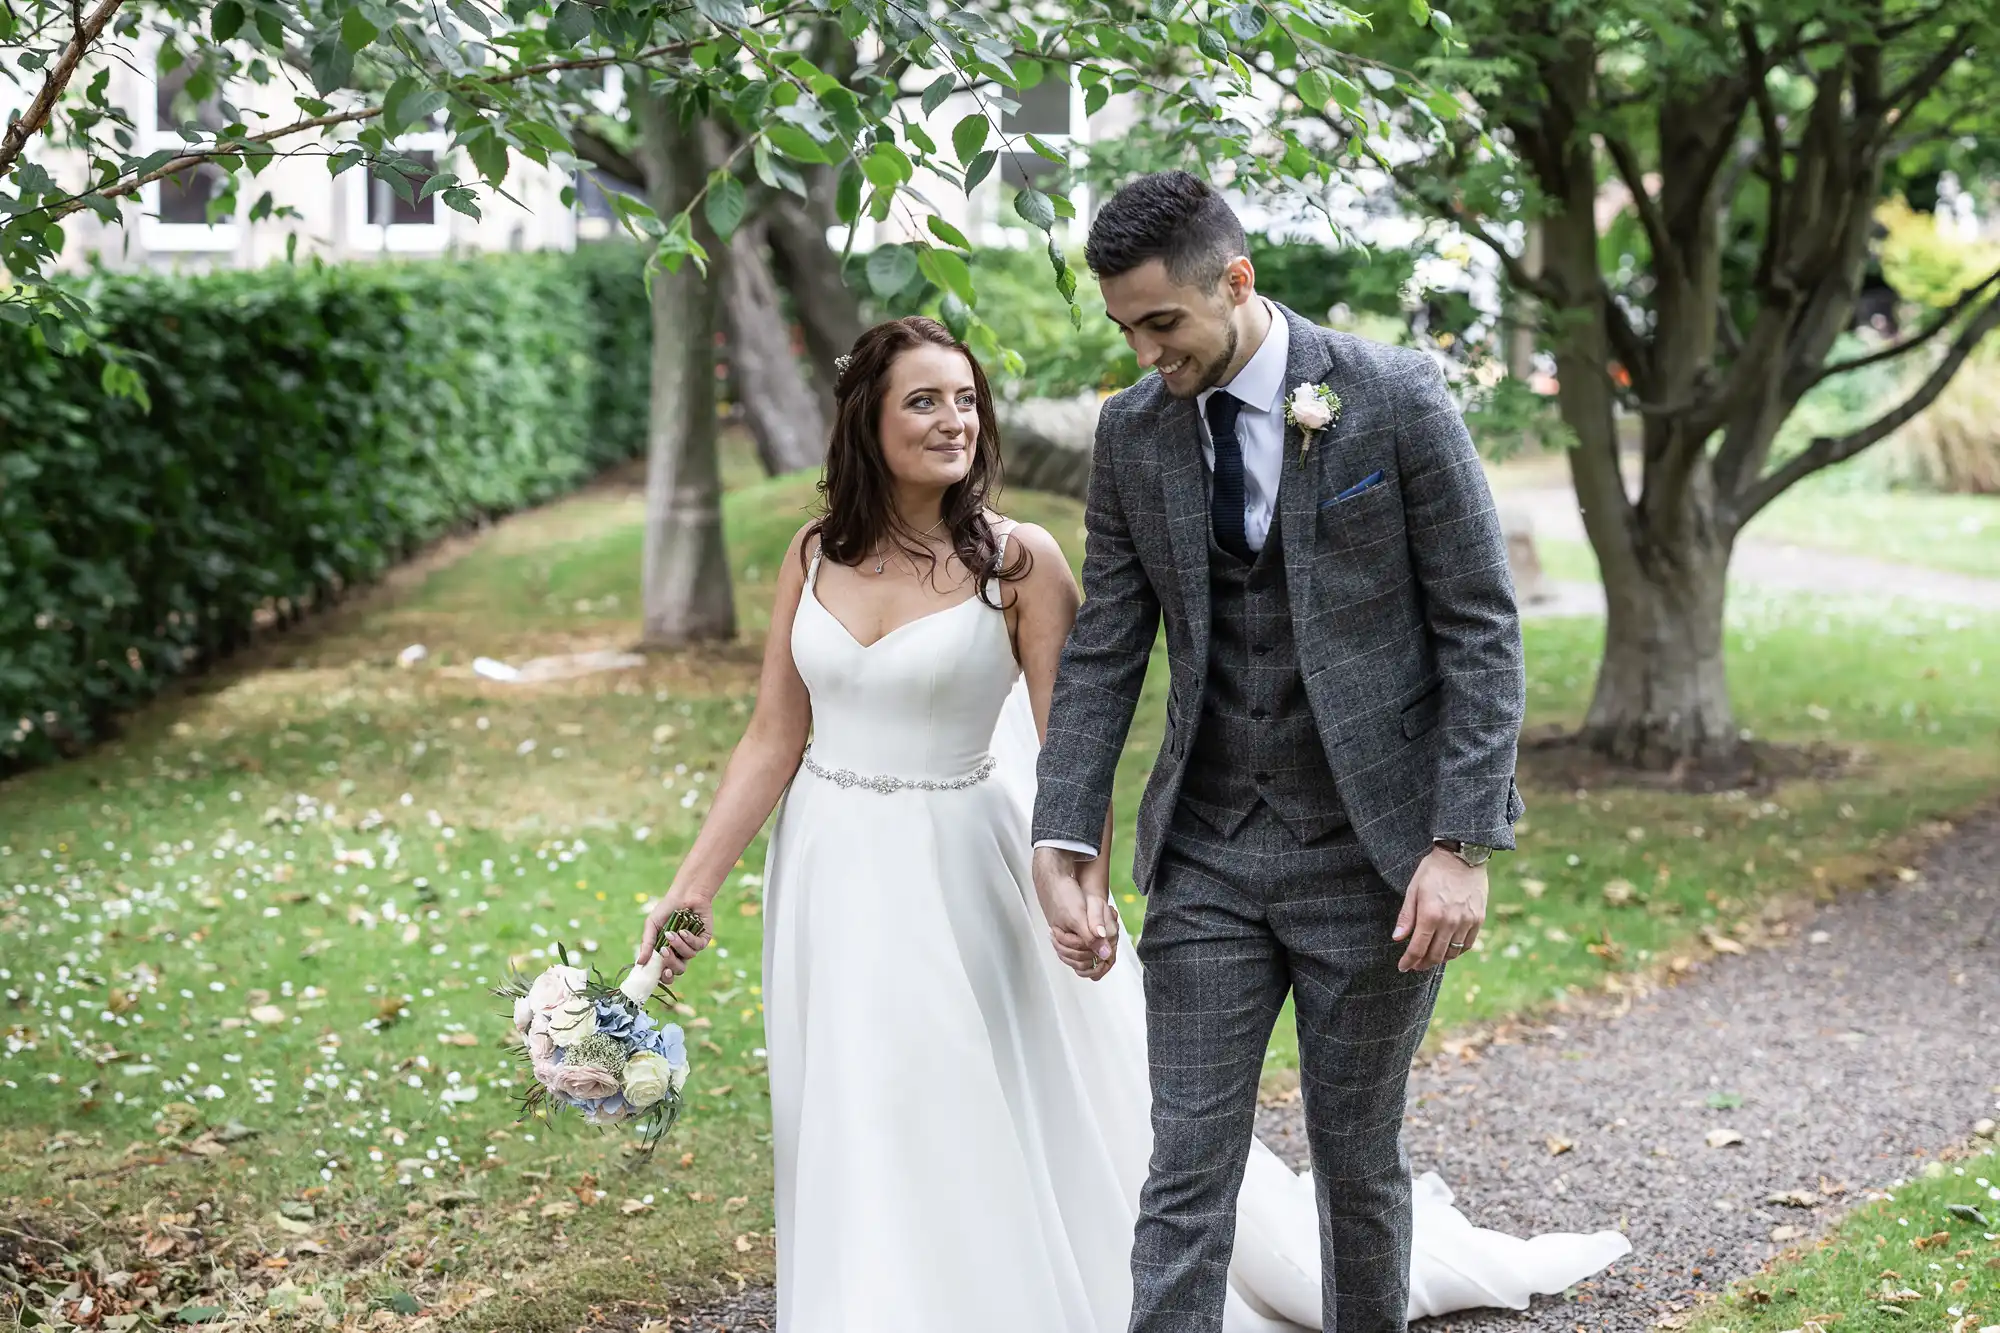 A bride and groom walking hand in hand through a garden pathway, smiling at each other. The bride is holding a bouquet.